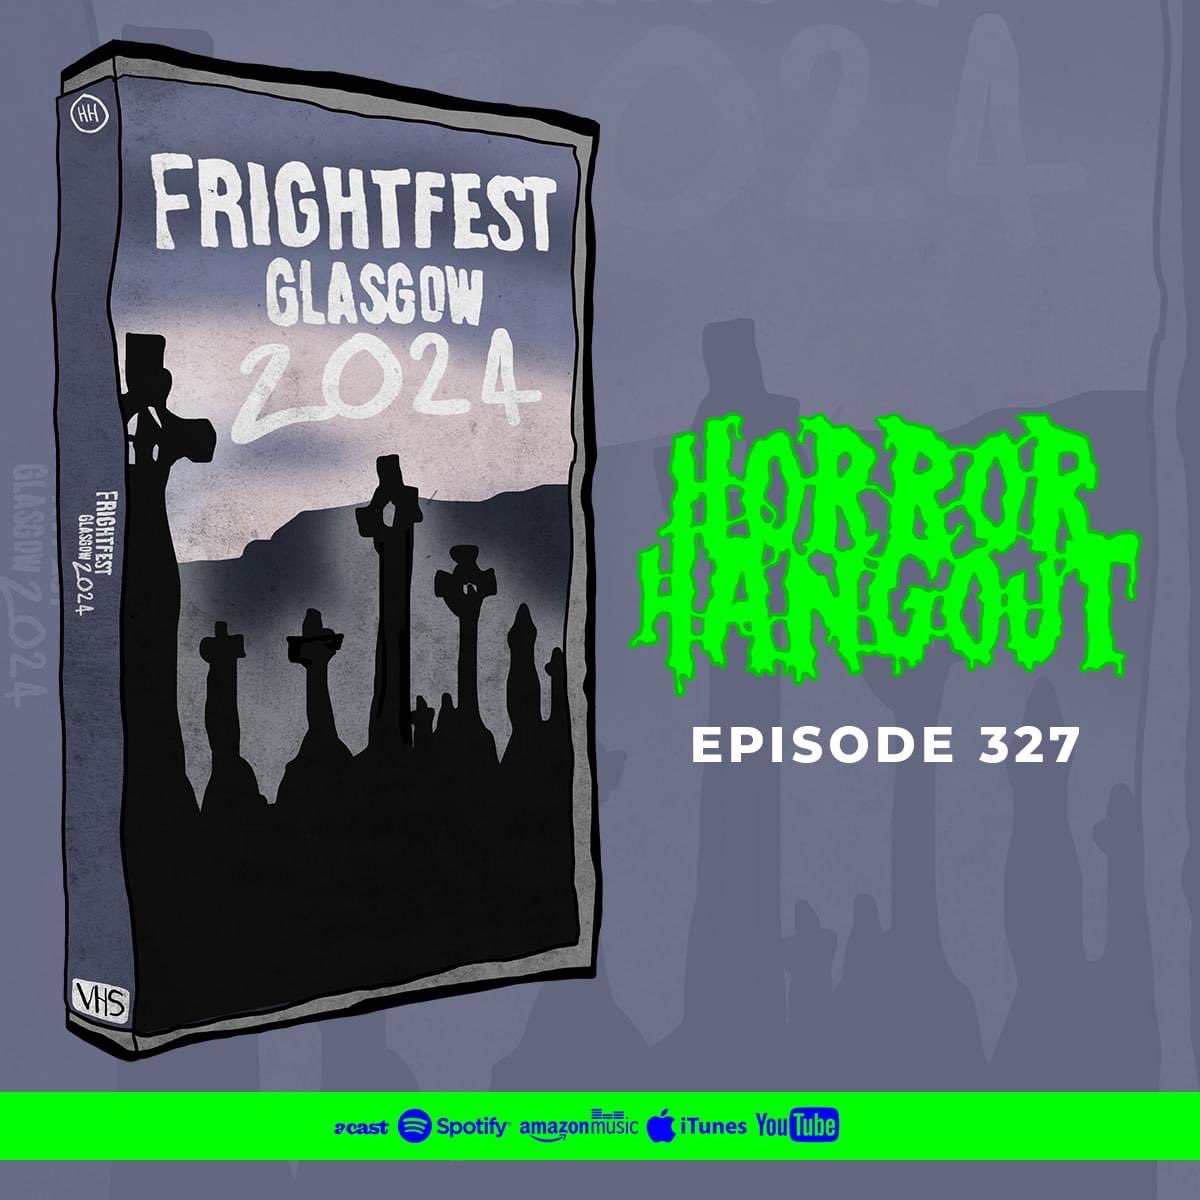 #FrightFest descended on the @glasgowfilmfest and so did #HorrorHangout hosts @ben_errington and @AndyCTWrites! @FrightFest @thepigeonshrine #FrightFestGlasgow #GFF24 Watch on @YouTube - youtu.be/Dl0hV-hVlSk Listen on podcast feeds - podlink.to/horrorhangout